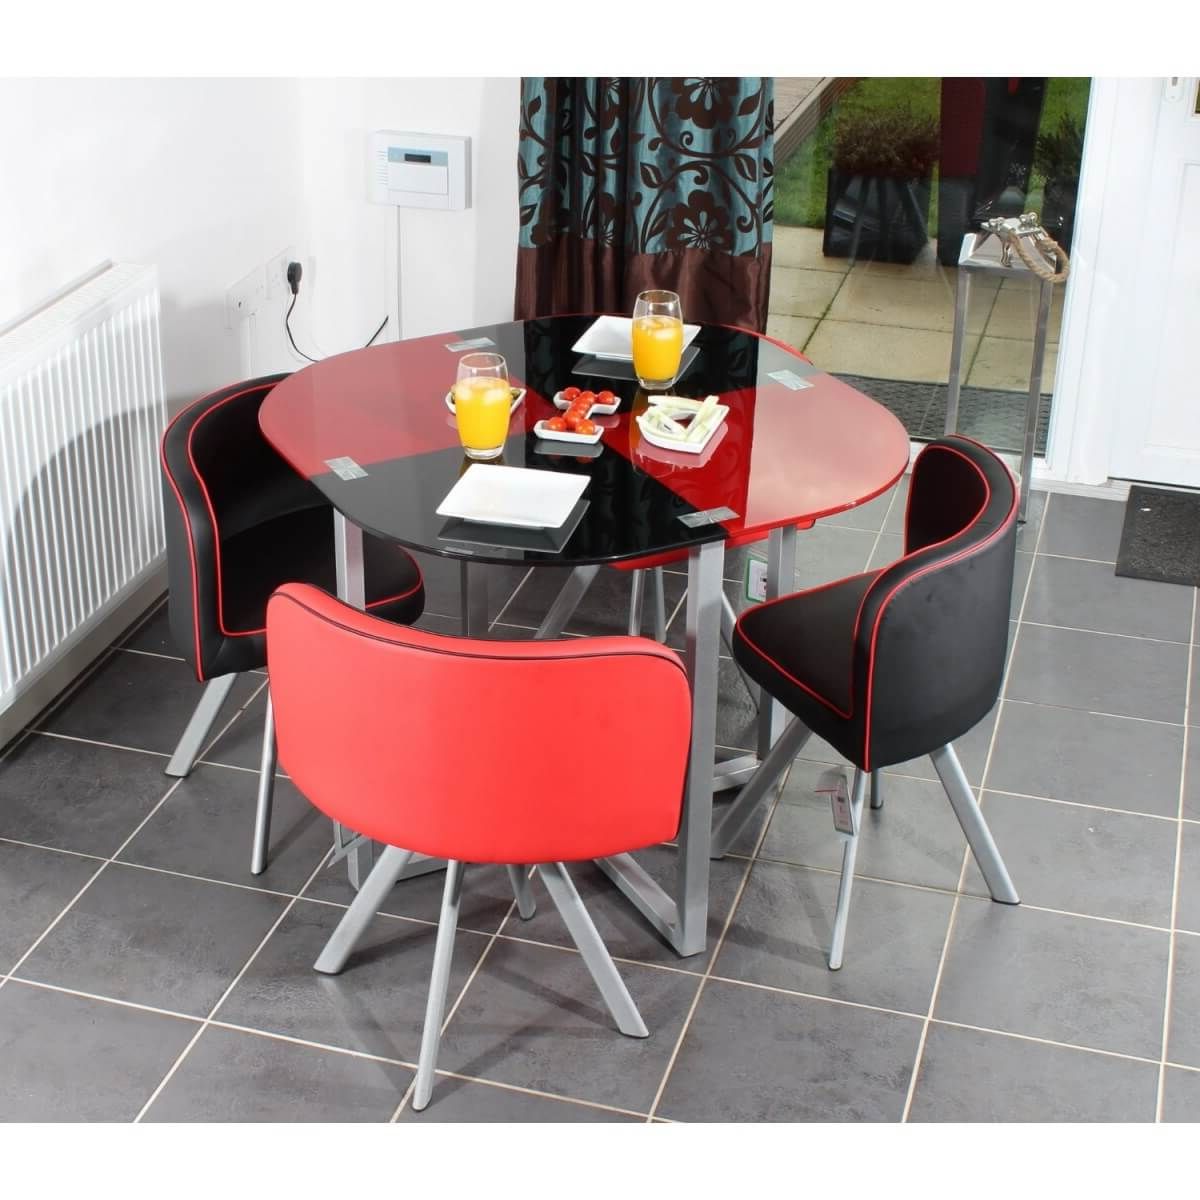 Retro Round Glasstop Dining Tables Throughout Well Known Round Red And Black Glossy Dining Table Addedthree Retro (View 12 of 25)